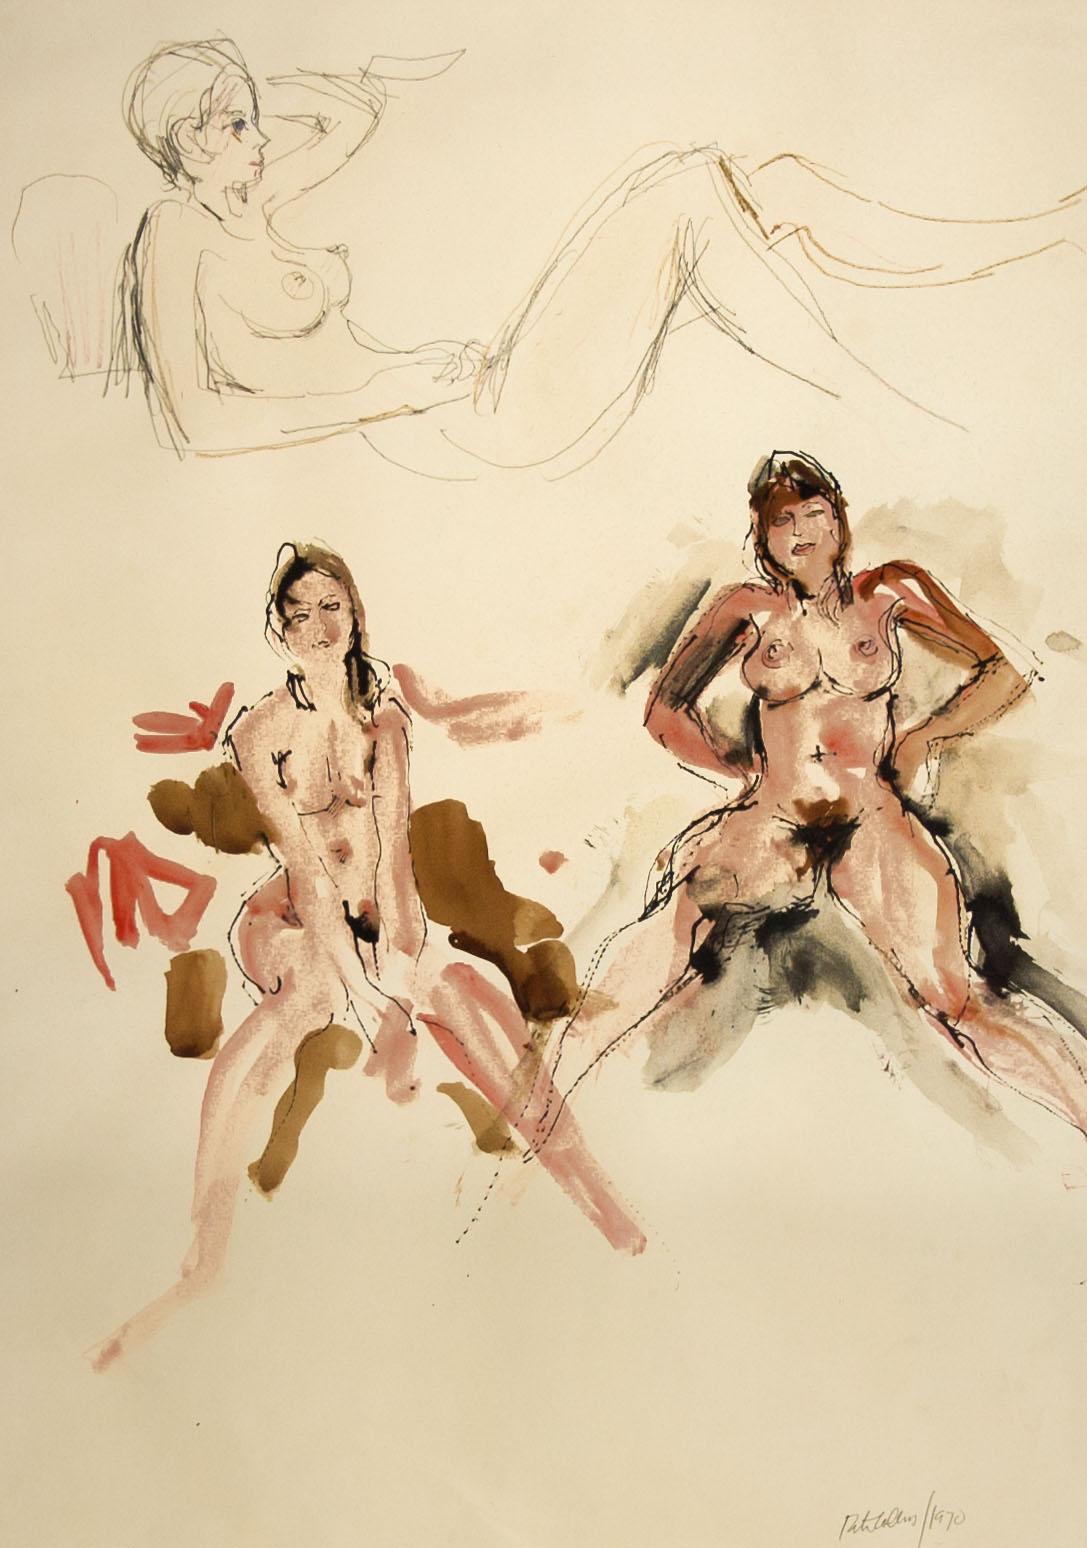 Peter Collins ARCA - Signed and Framed 1970 Watercolour, Female Nude Studies